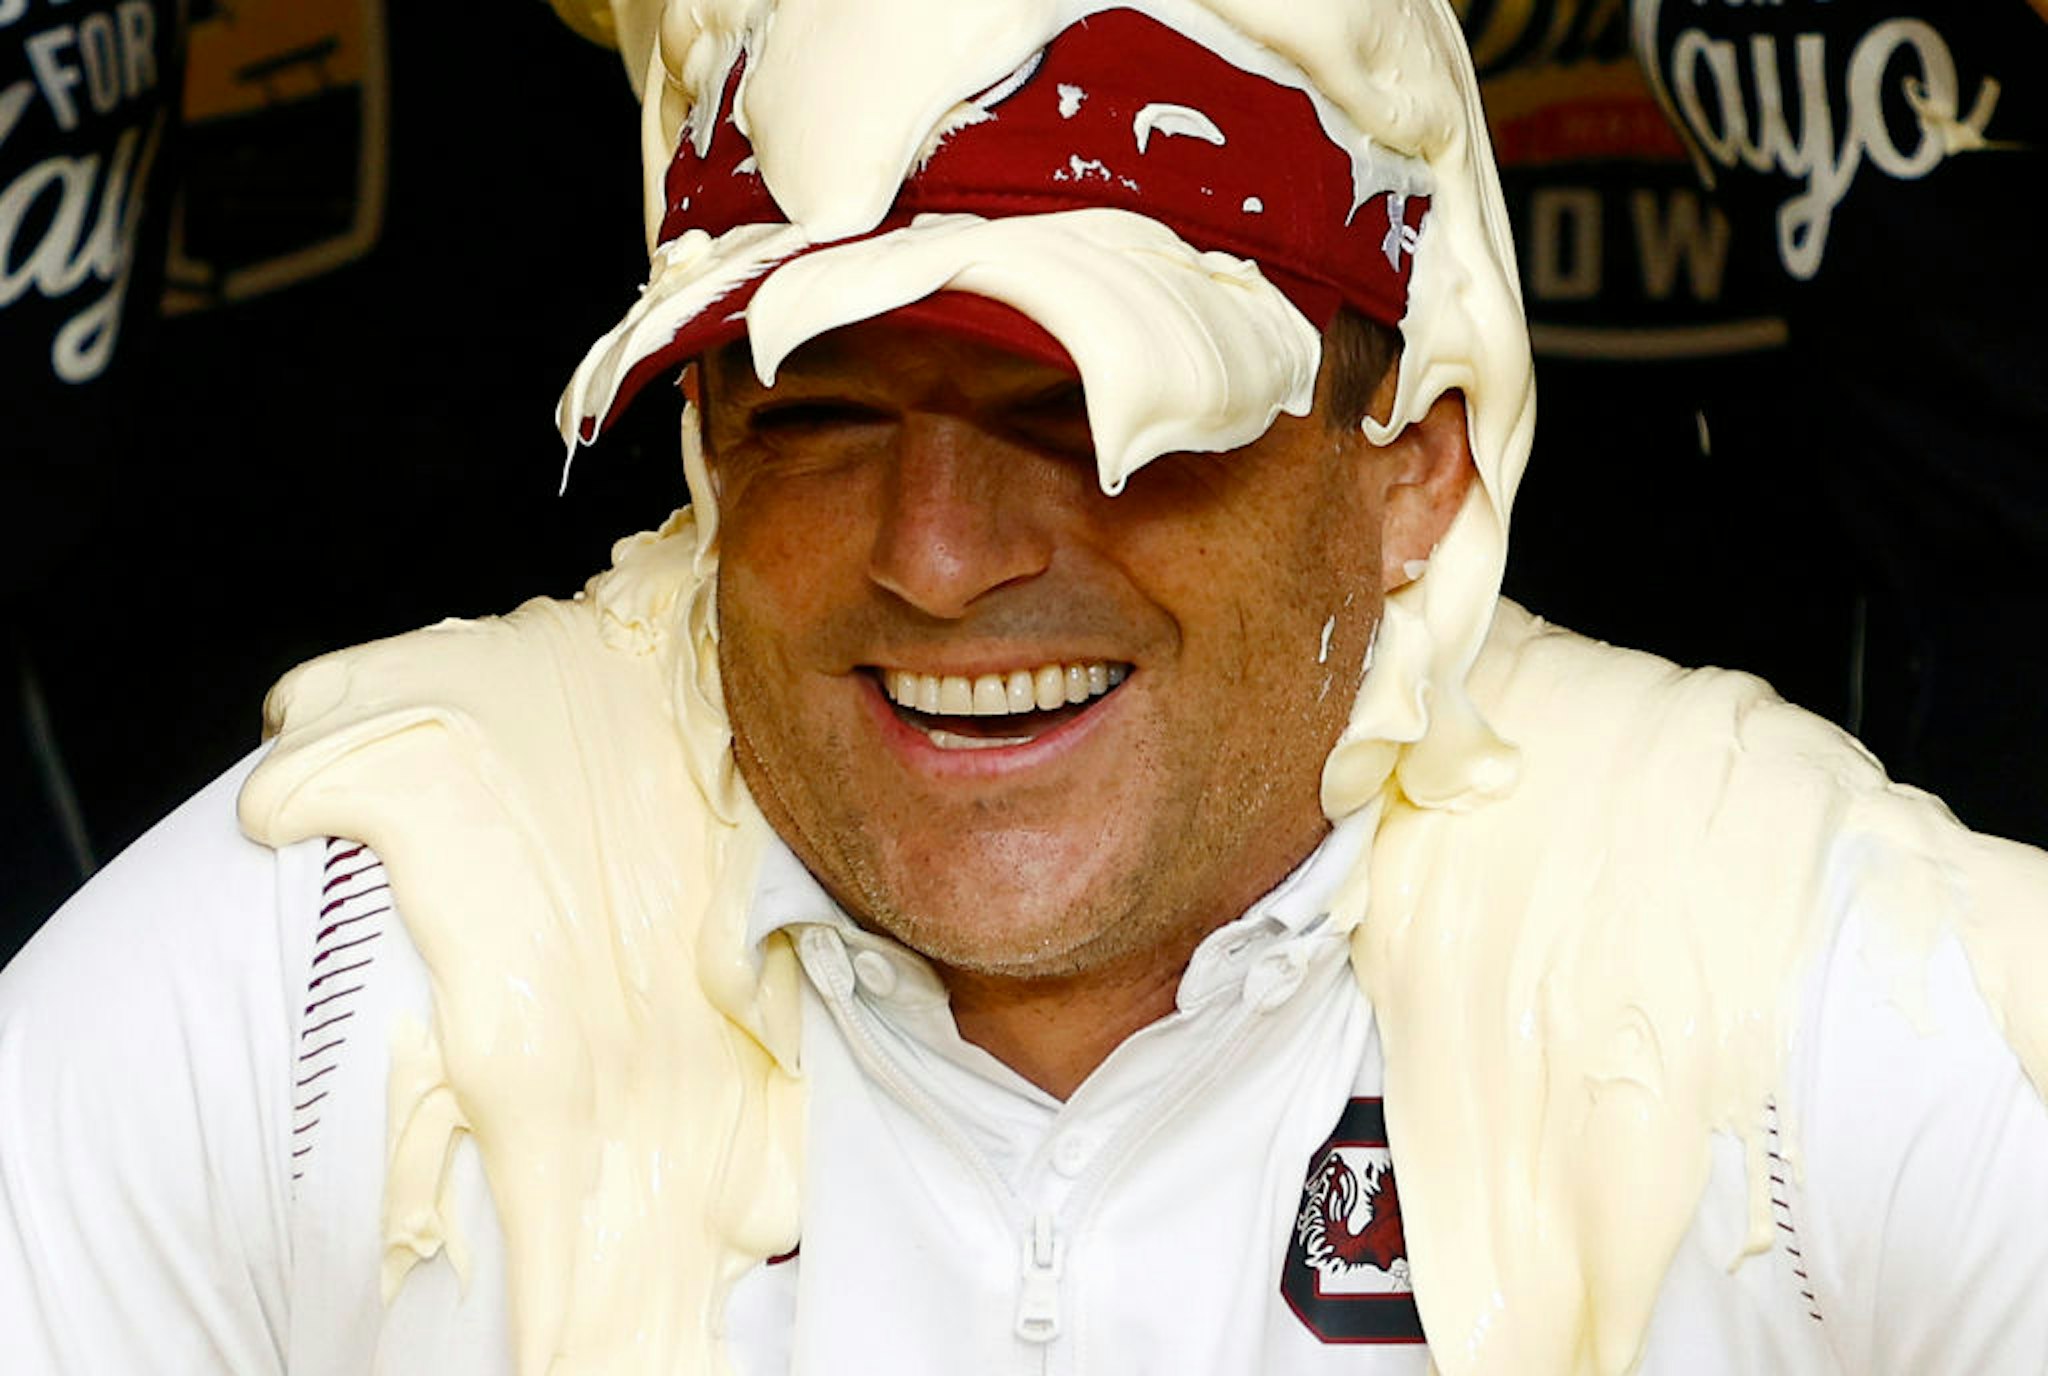 Head coach Shane Beamer of the South Carolina Gamecocks is covered in Duke's Mayonnaise following their 38-21 victory over the North Carolina Tar Heels in the Duke's Mayo Bowl at Bank of America Stadium on December 30, 2021 in Charlotte, North Carolina